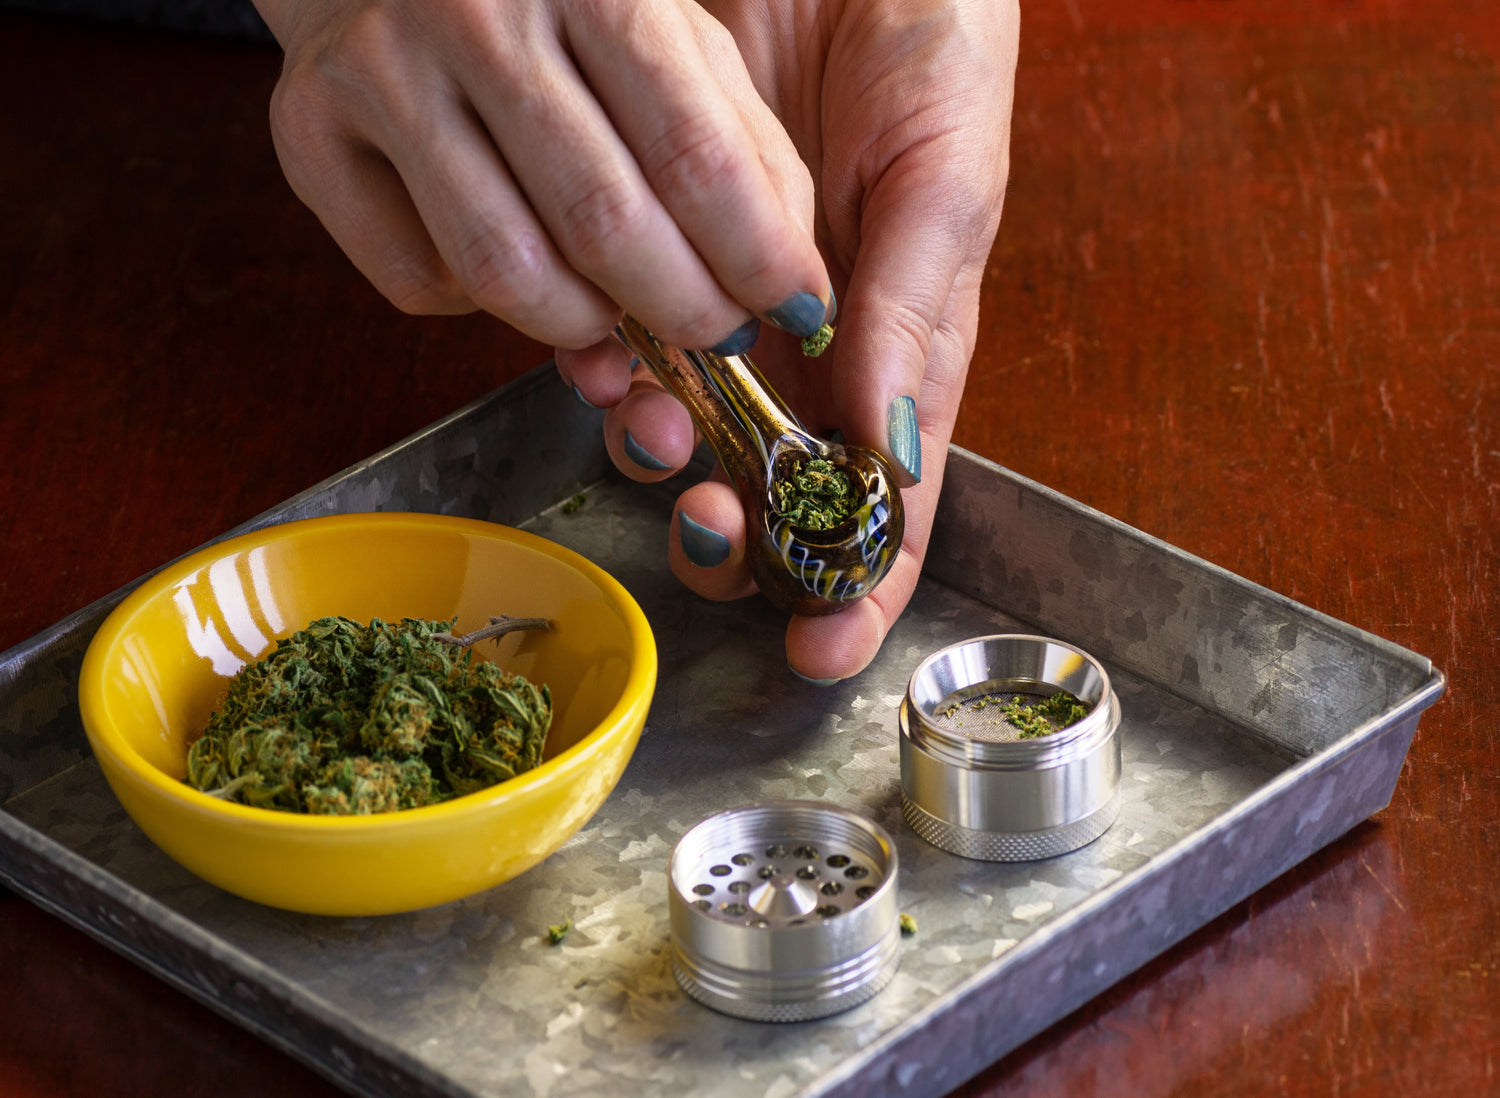 How to Pack And Smoke a Weed Pipe: A Comprehensive Guide